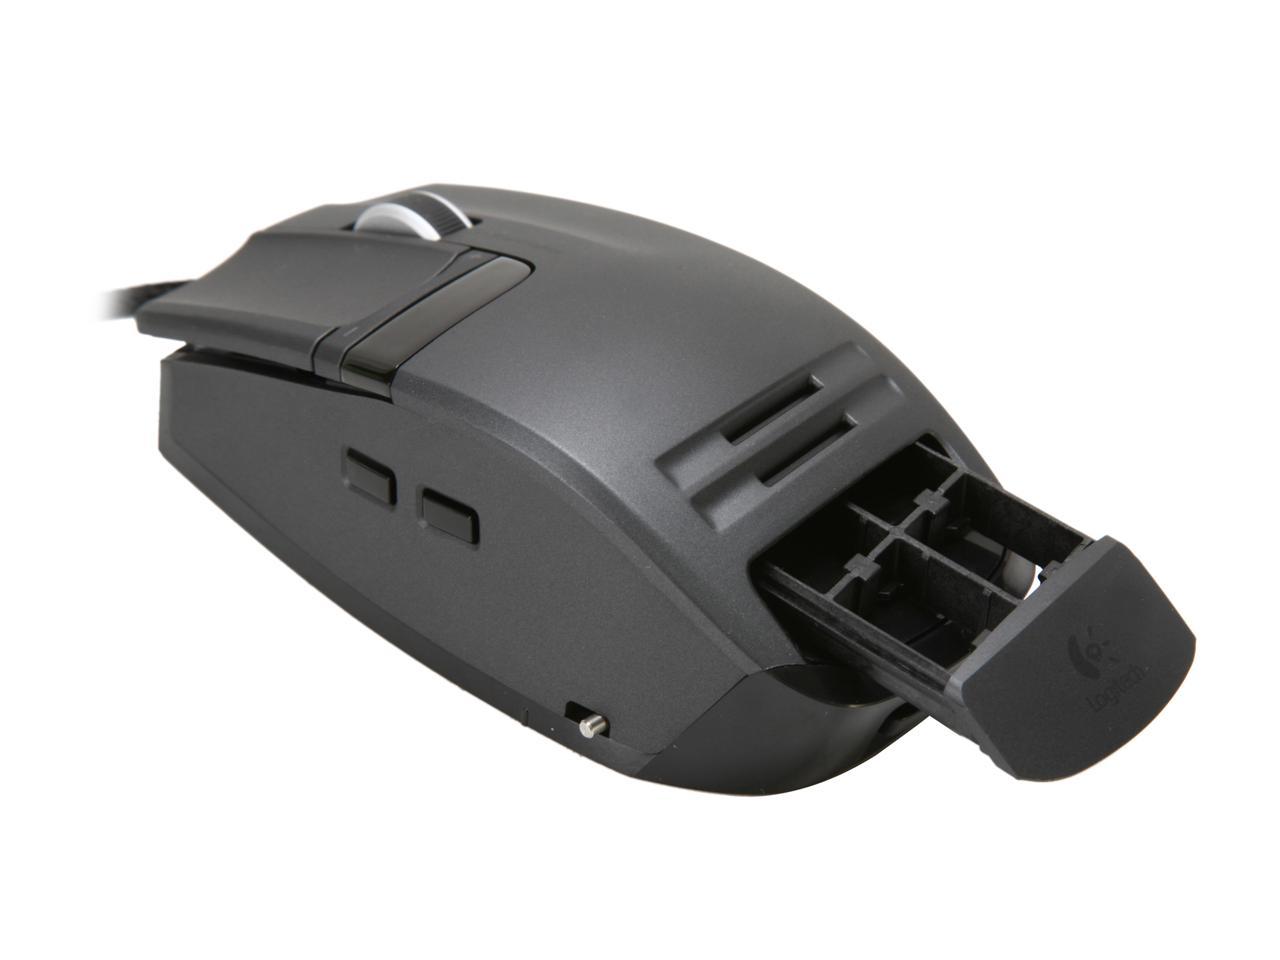 Logitech G9x Black Wired Laser Gaming Mouse - Newegg.com